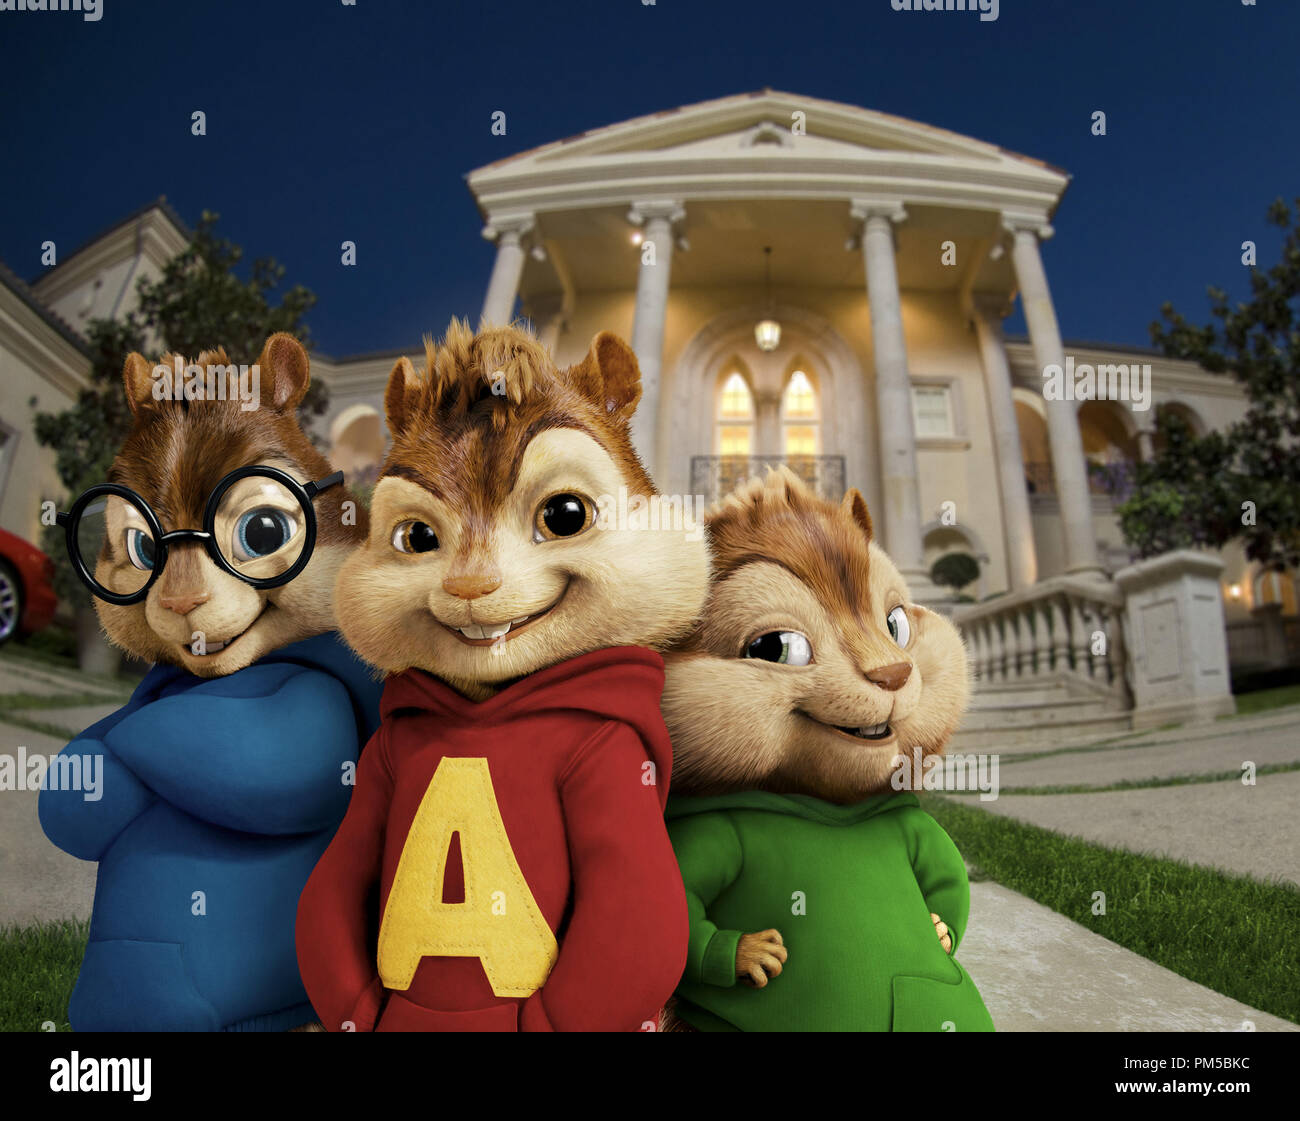 Chipmunks alvin and Every Alvin